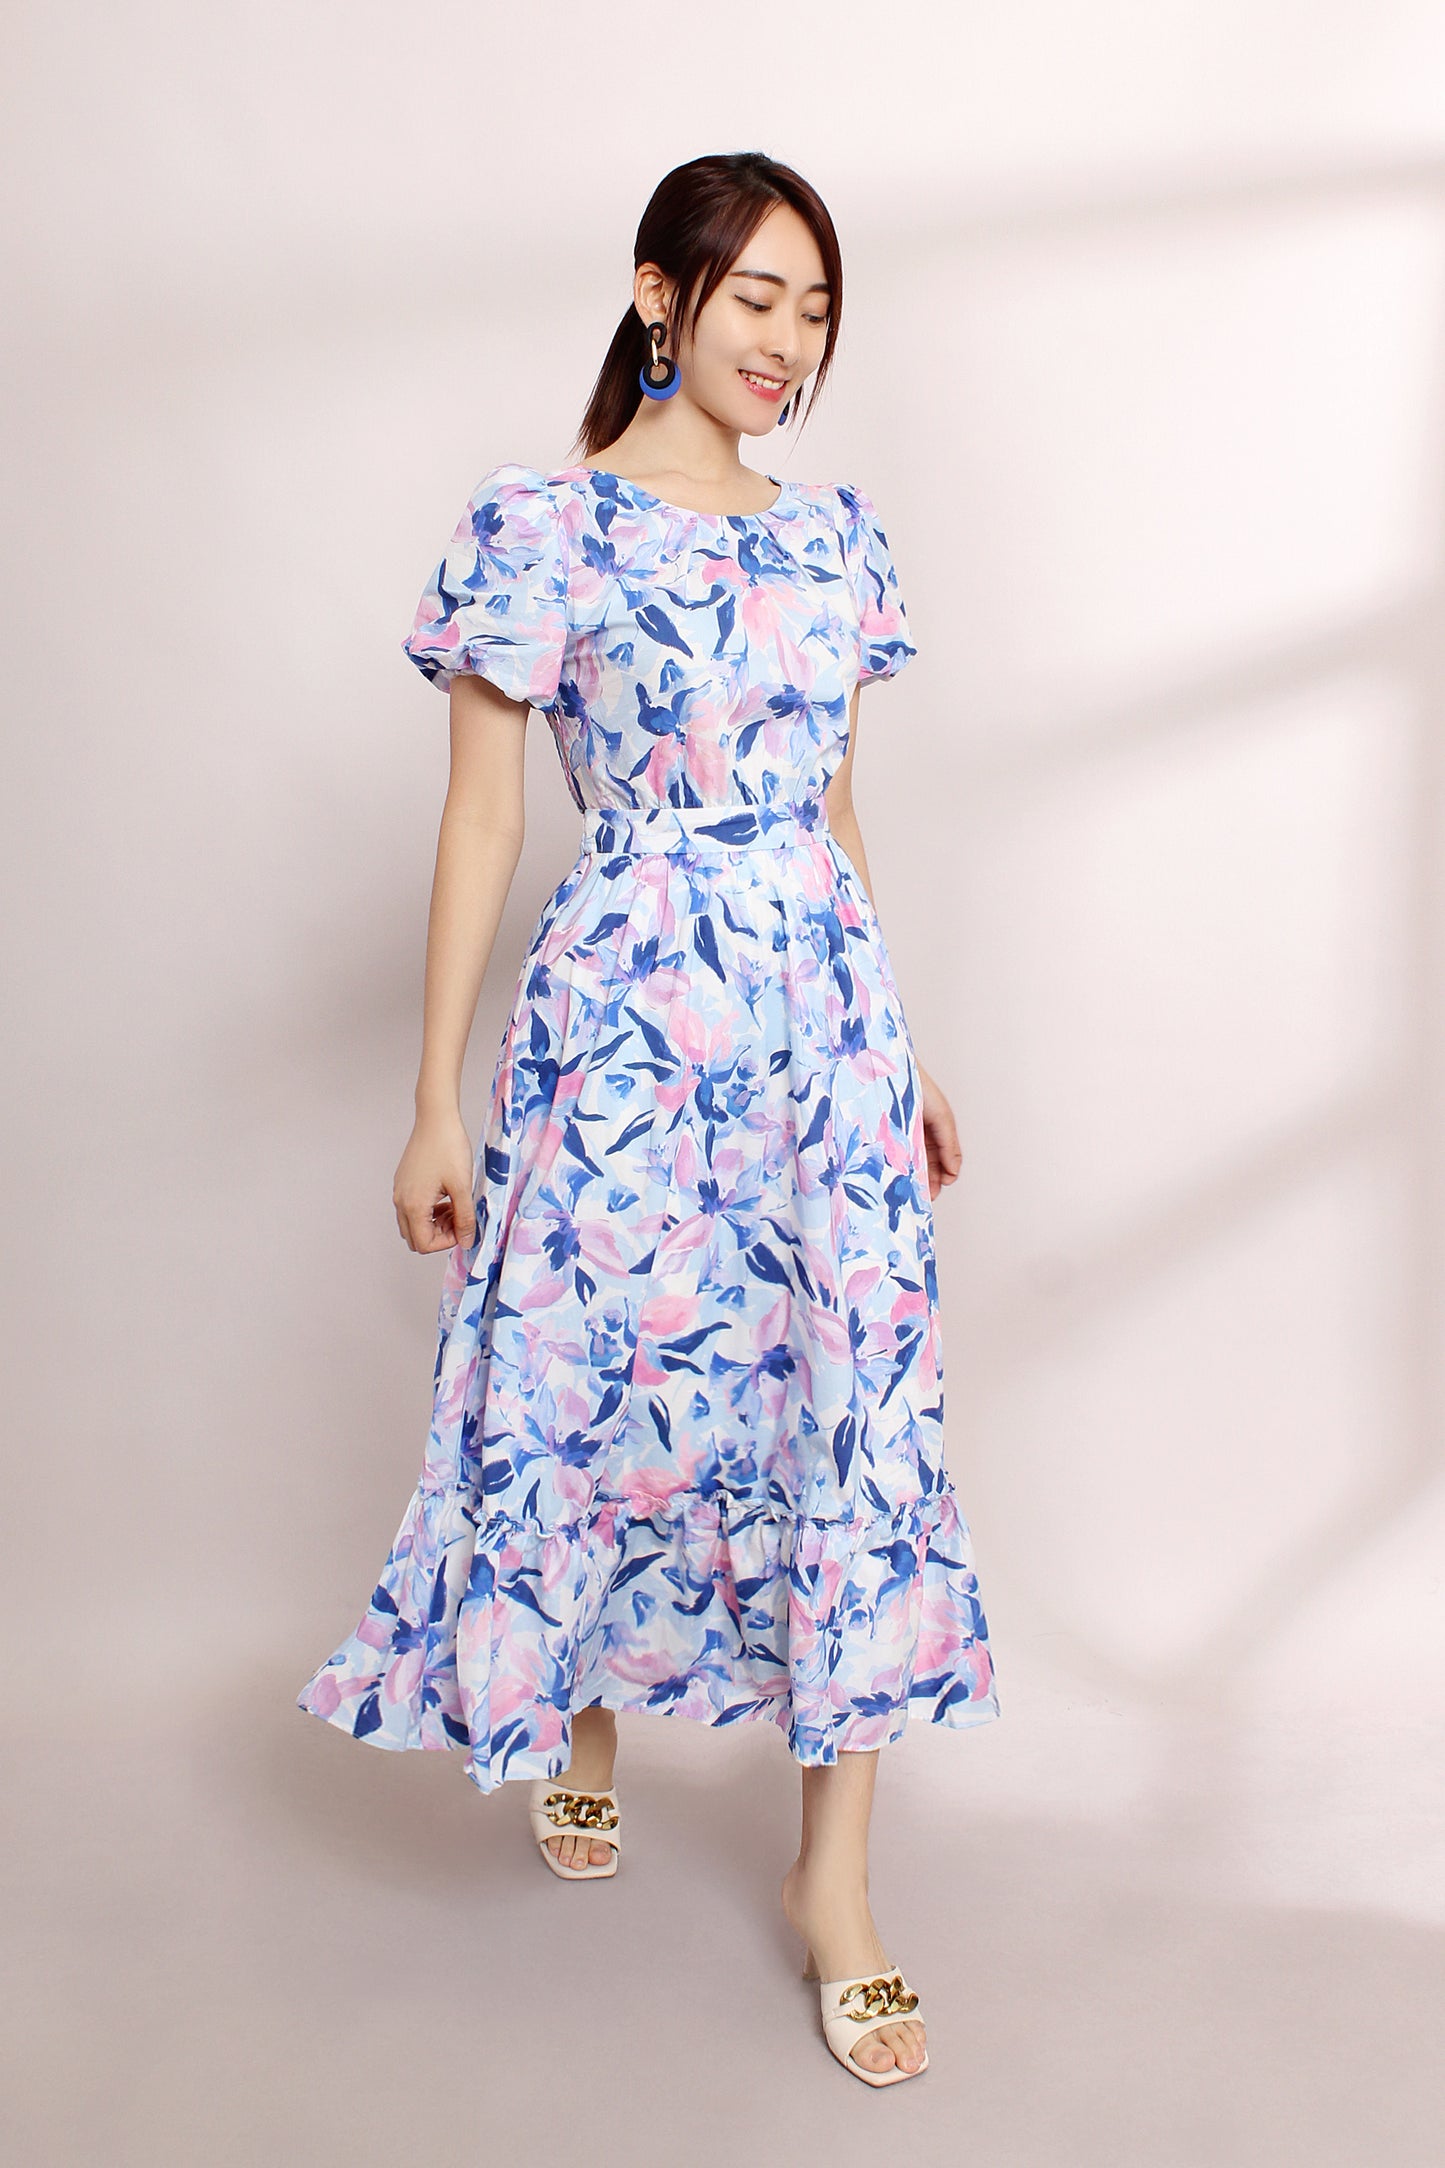 Althea Floral Ruffled Dress